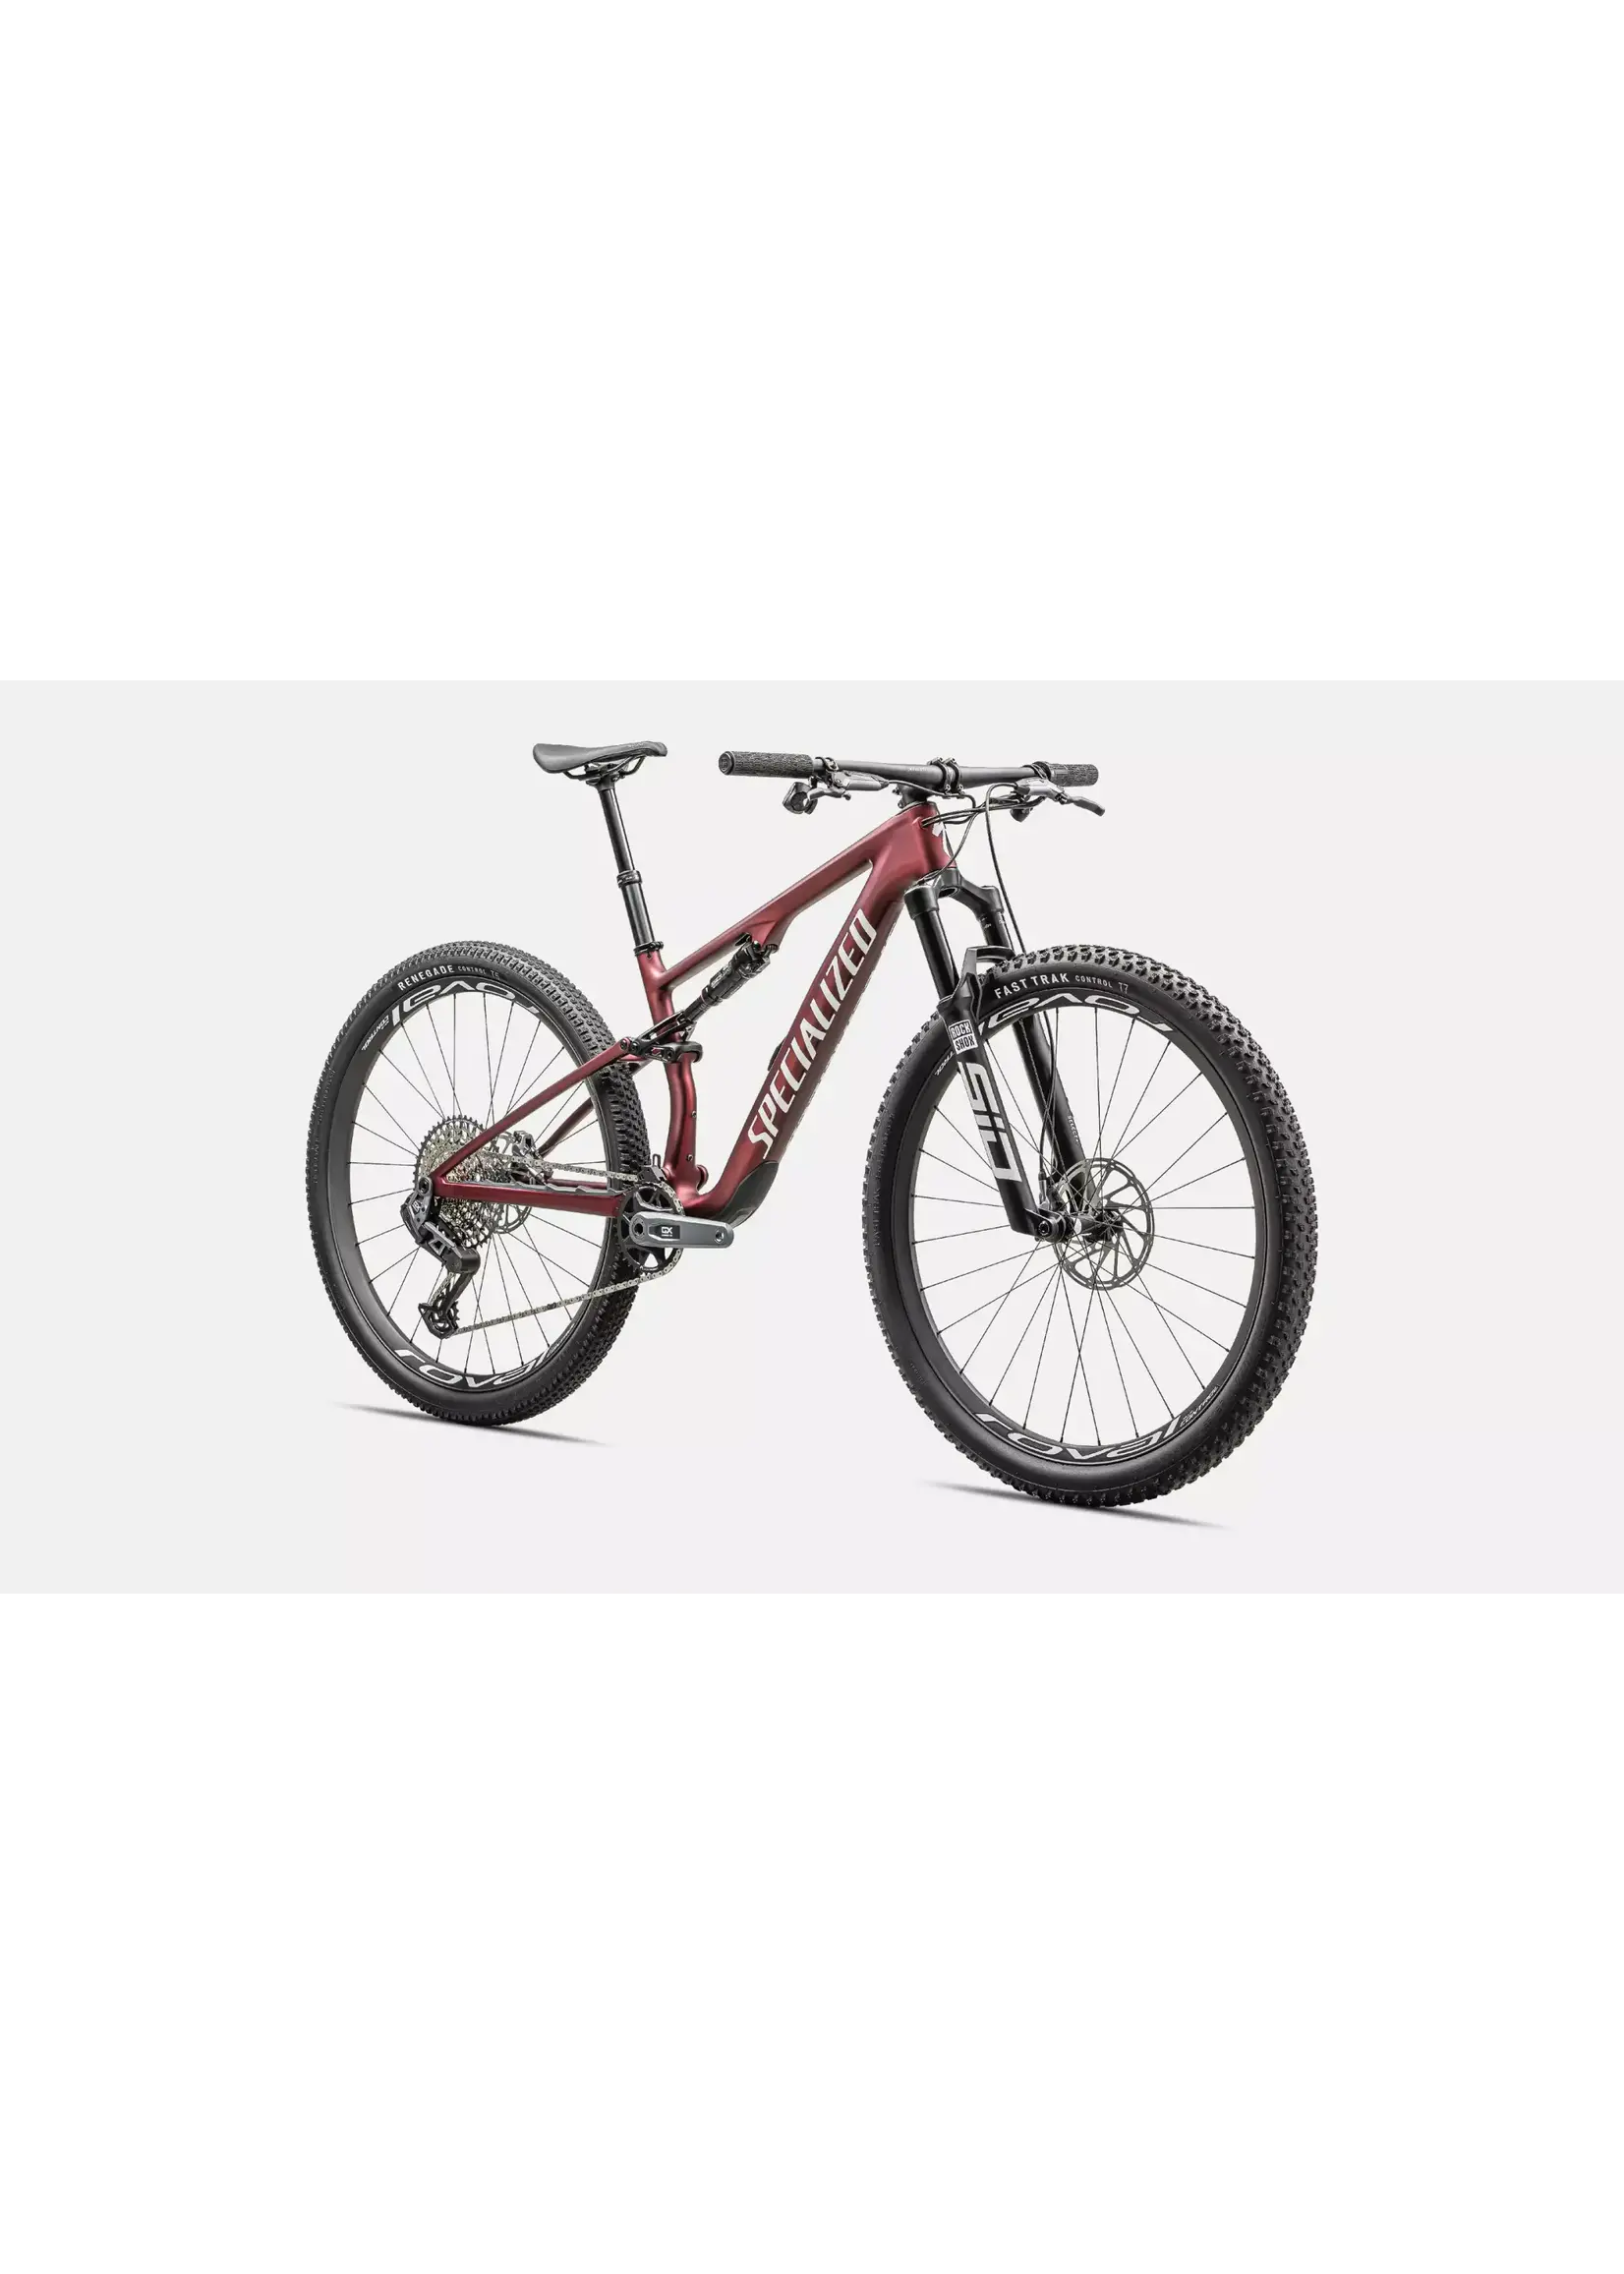 Specialized 24 EPIC 8 EXPERT 29 BIKE